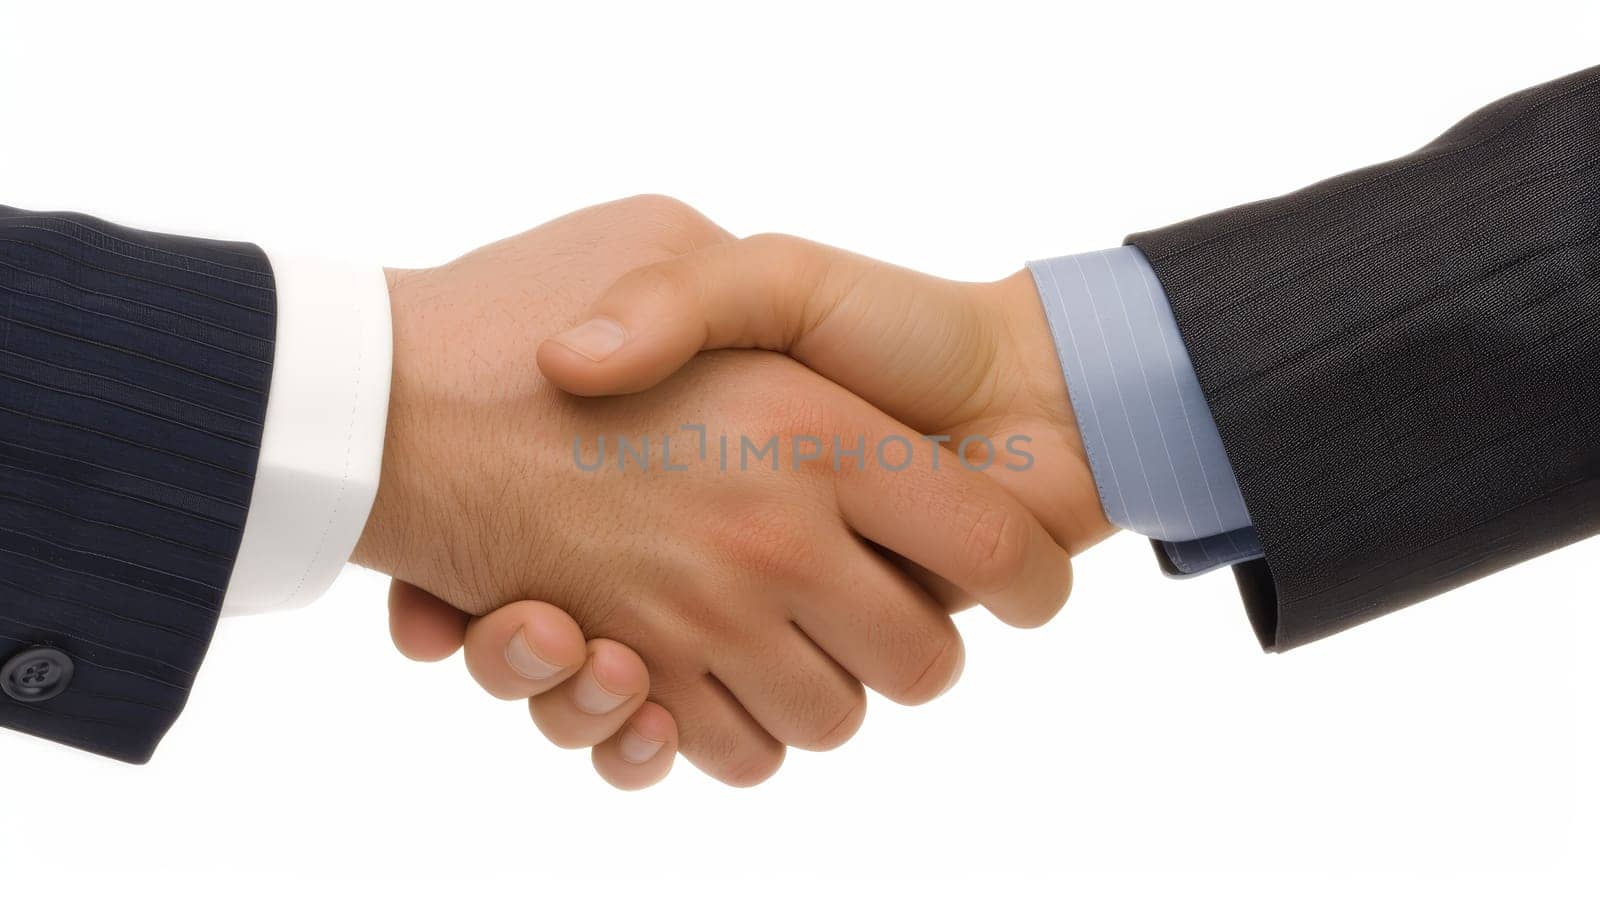 Detailed view of a formal business handshake between two individuals in professional attire against a white background.